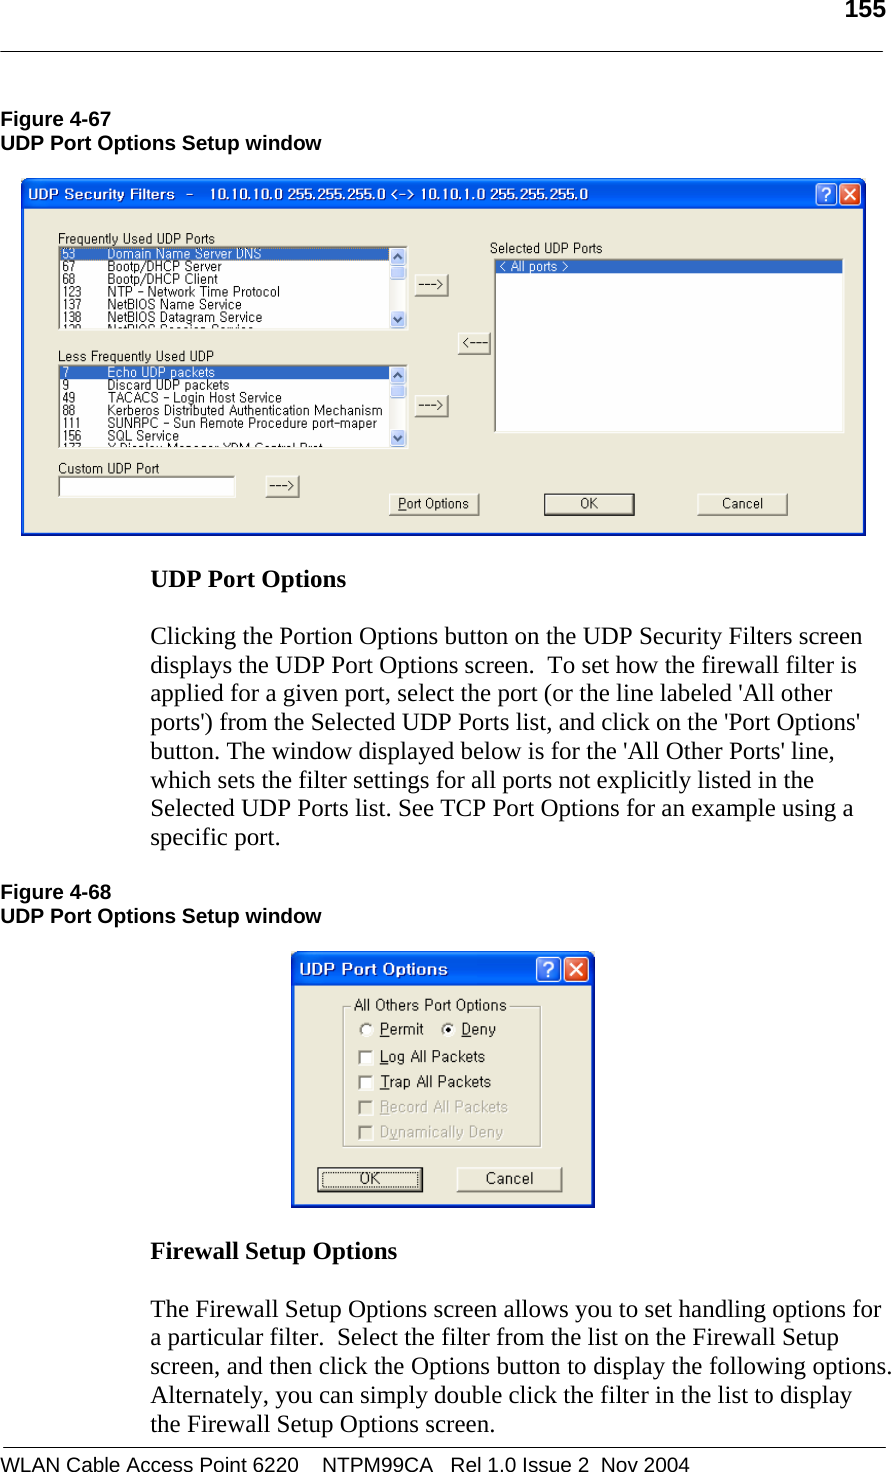   155  WLAN Cable Access Point 6220    NTPM99CA   Rel 1.0 Issue 2  Nov 2004 Figure 4-67 UDP Port Options Setup window    UDP Port Options   Clicking the Portion Options button on the UDP Security Filters screen displays the UDP Port Options screen.  To set how the firewall filter is applied for a given port, select the port (or the line labeled &apos;All other ports&apos;) from the Selected UDP Ports list, and click on the &apos;Port Options&apos; button. The window displayed below is for the &apos;All Other Ports&apos; line, which sets the filter settings for all ports not explicitly listed in the Selected UDP Ports list. See TCP Port Options for an example using a specific port.  Figure 4-68 UDP Port Options Setup window    Firewall Setup Options   The Firewall Setup Options screen allows you to set handling options for a particular filter.  Select the filter from the list on the Firewall Setup screen, and then click the Options button to display the following options. Alternately, you can simply double click the filter in the list to display the Firewall Setup Options screen. 